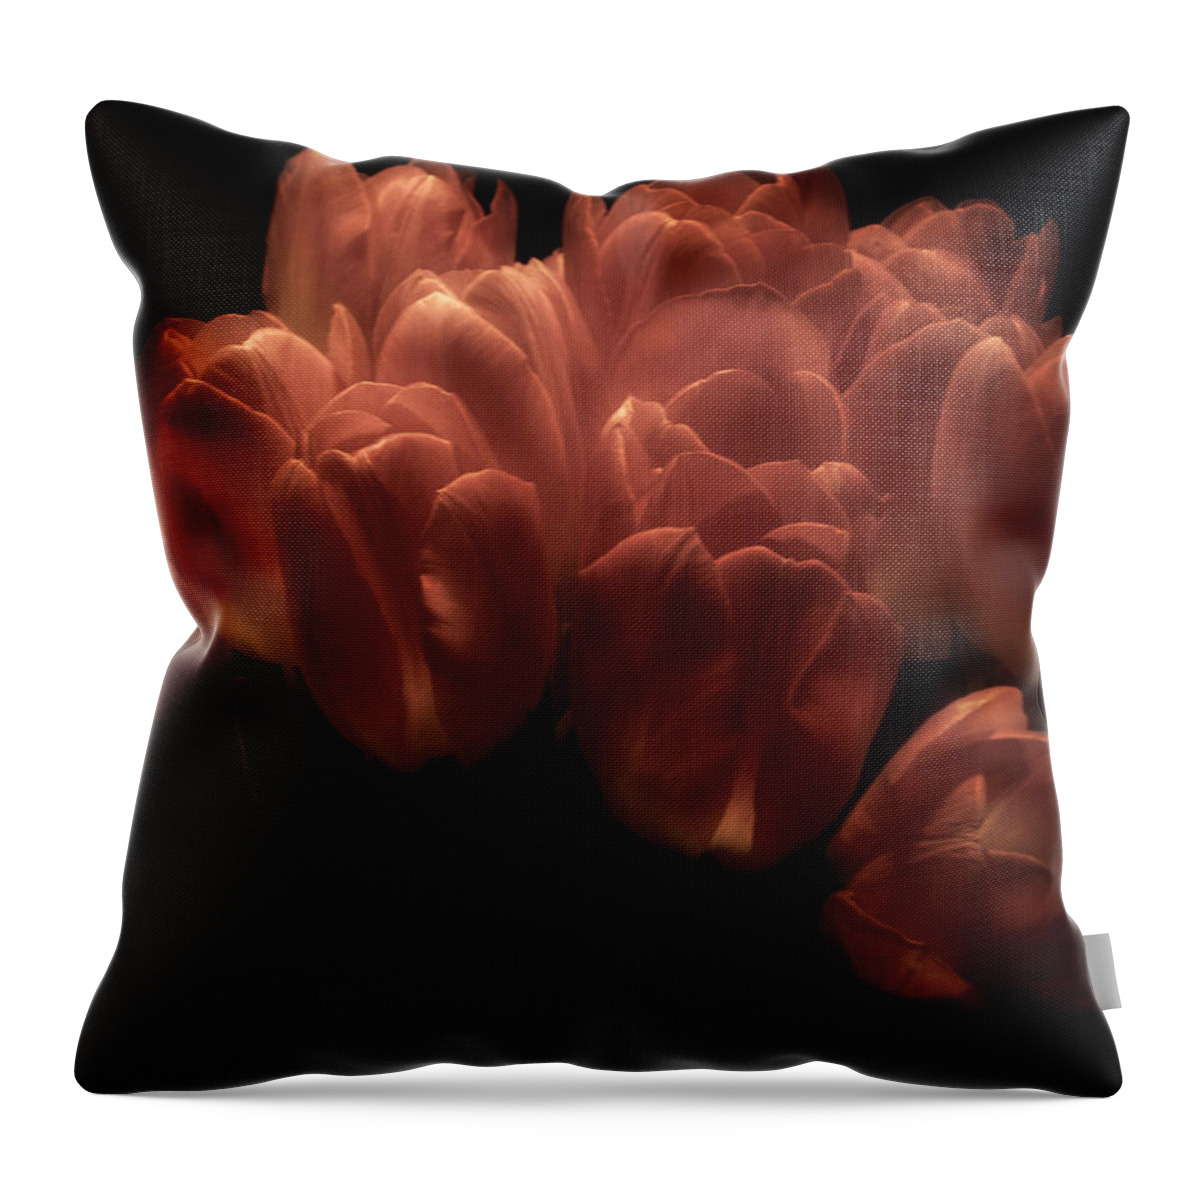 Tulips Throw Pillow featuring the photograph Romantic Tulips by Richard Cummings